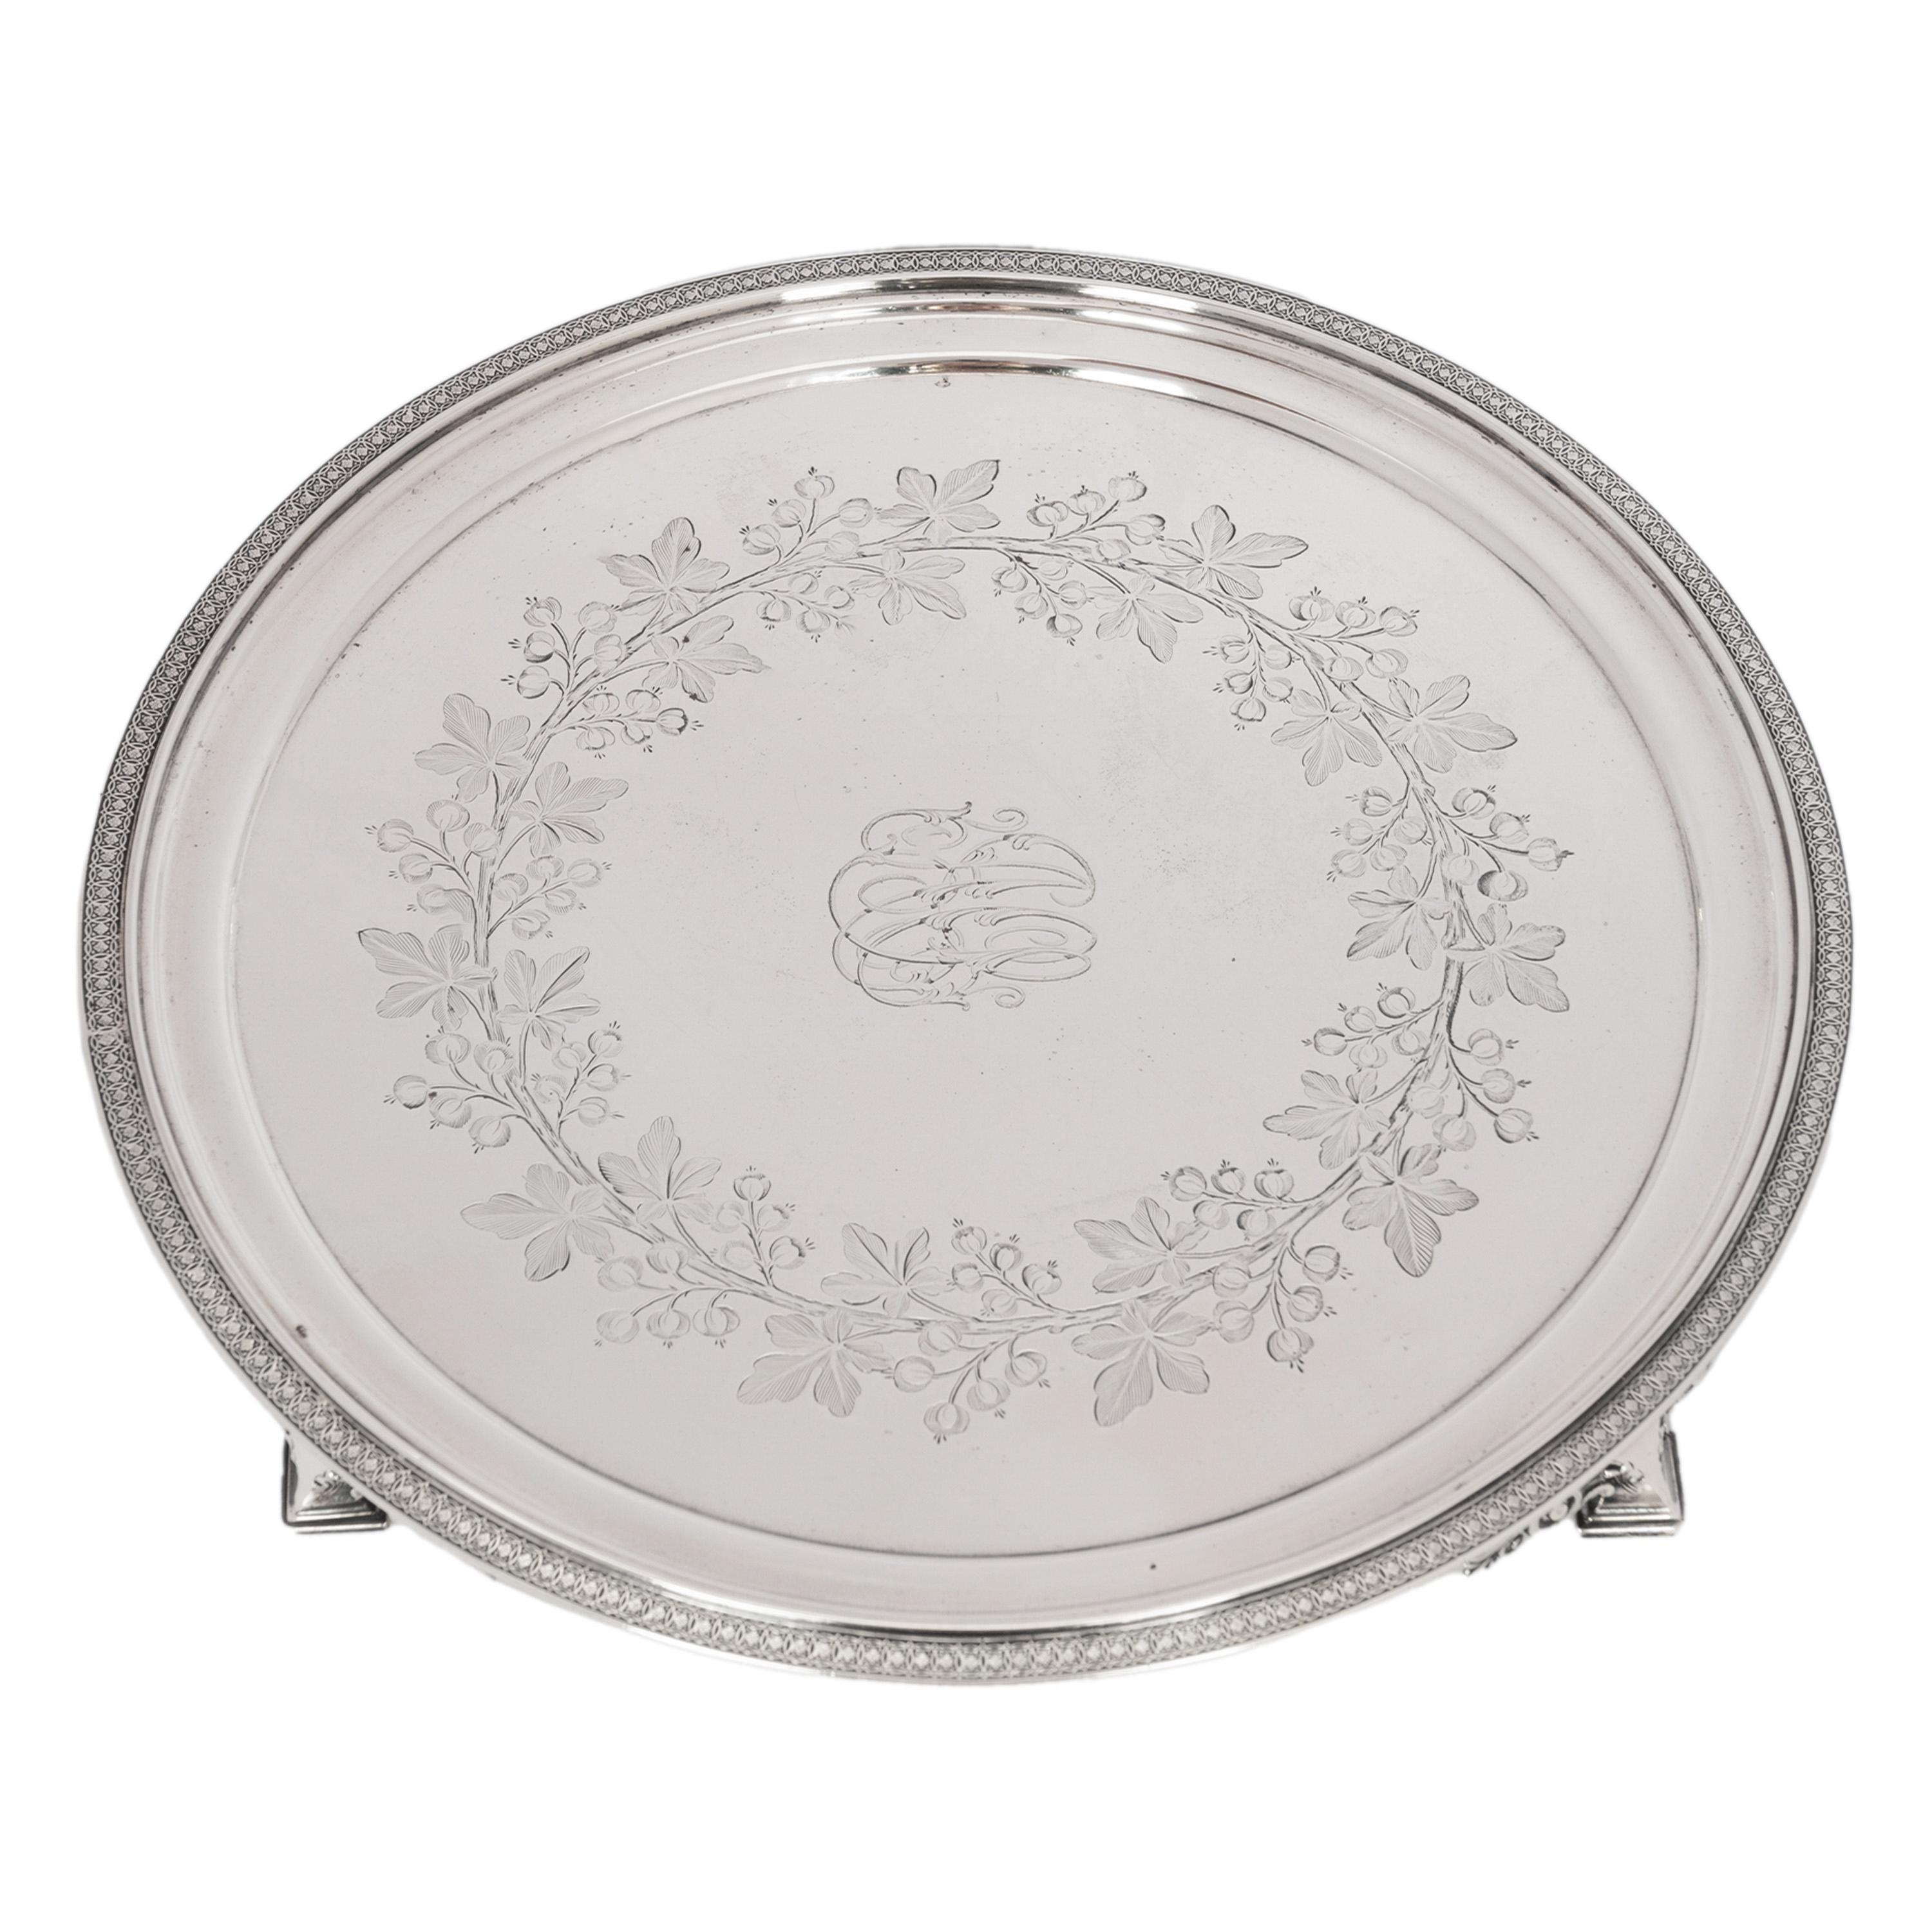 Late 19th Century Antique Engraved Sterling Silver Tiffany & Co Footed Salver Tray New York 1870 For Sale